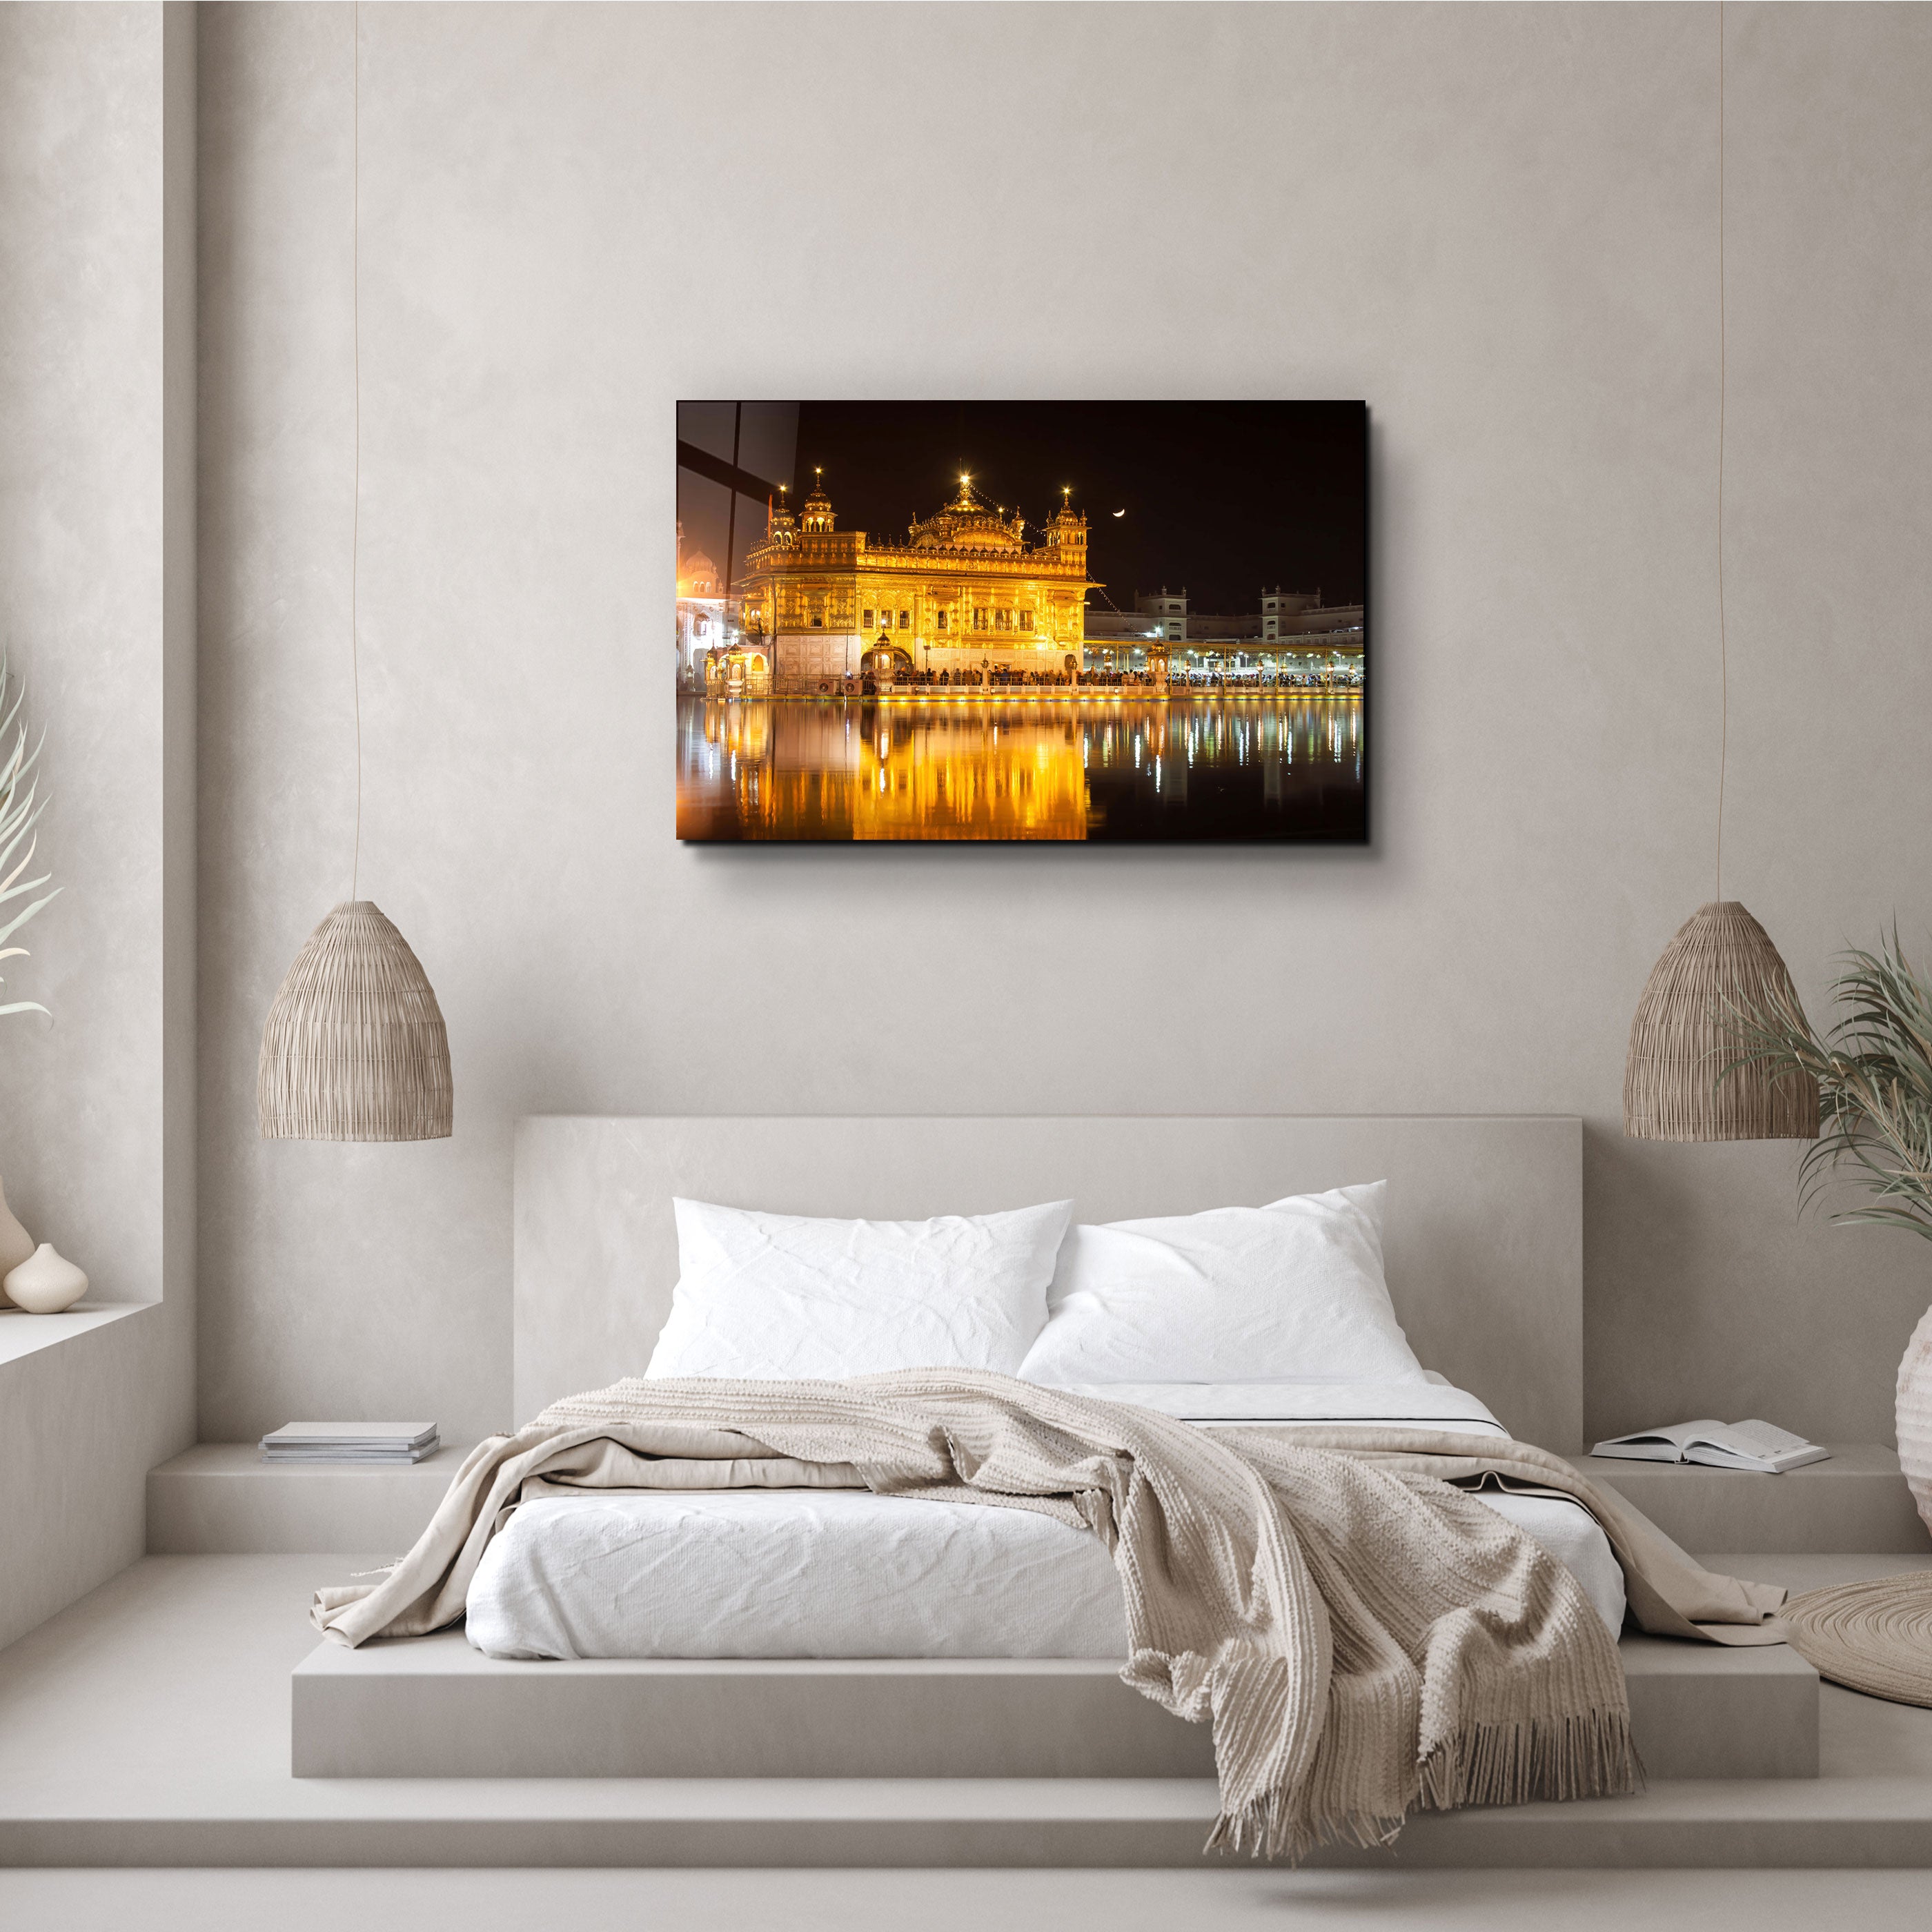 ・"The stunning Sikh Golden Temple in Amritsar, Punjab region in India"・Glass Wall Art